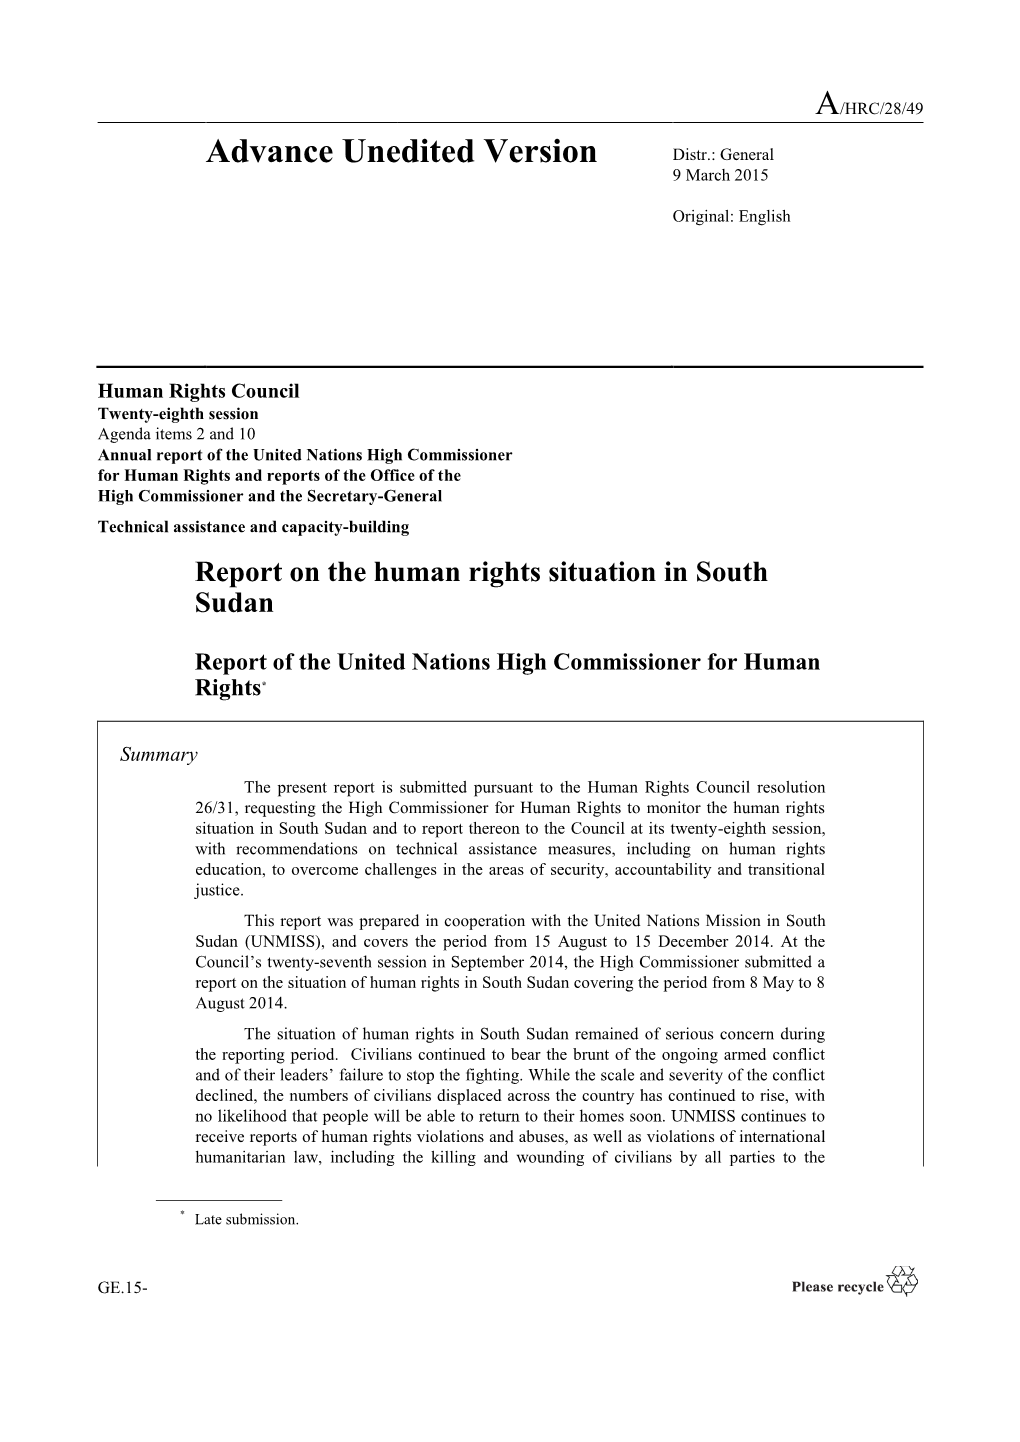 Report of the United Nations High Commissioner for Human Rights On